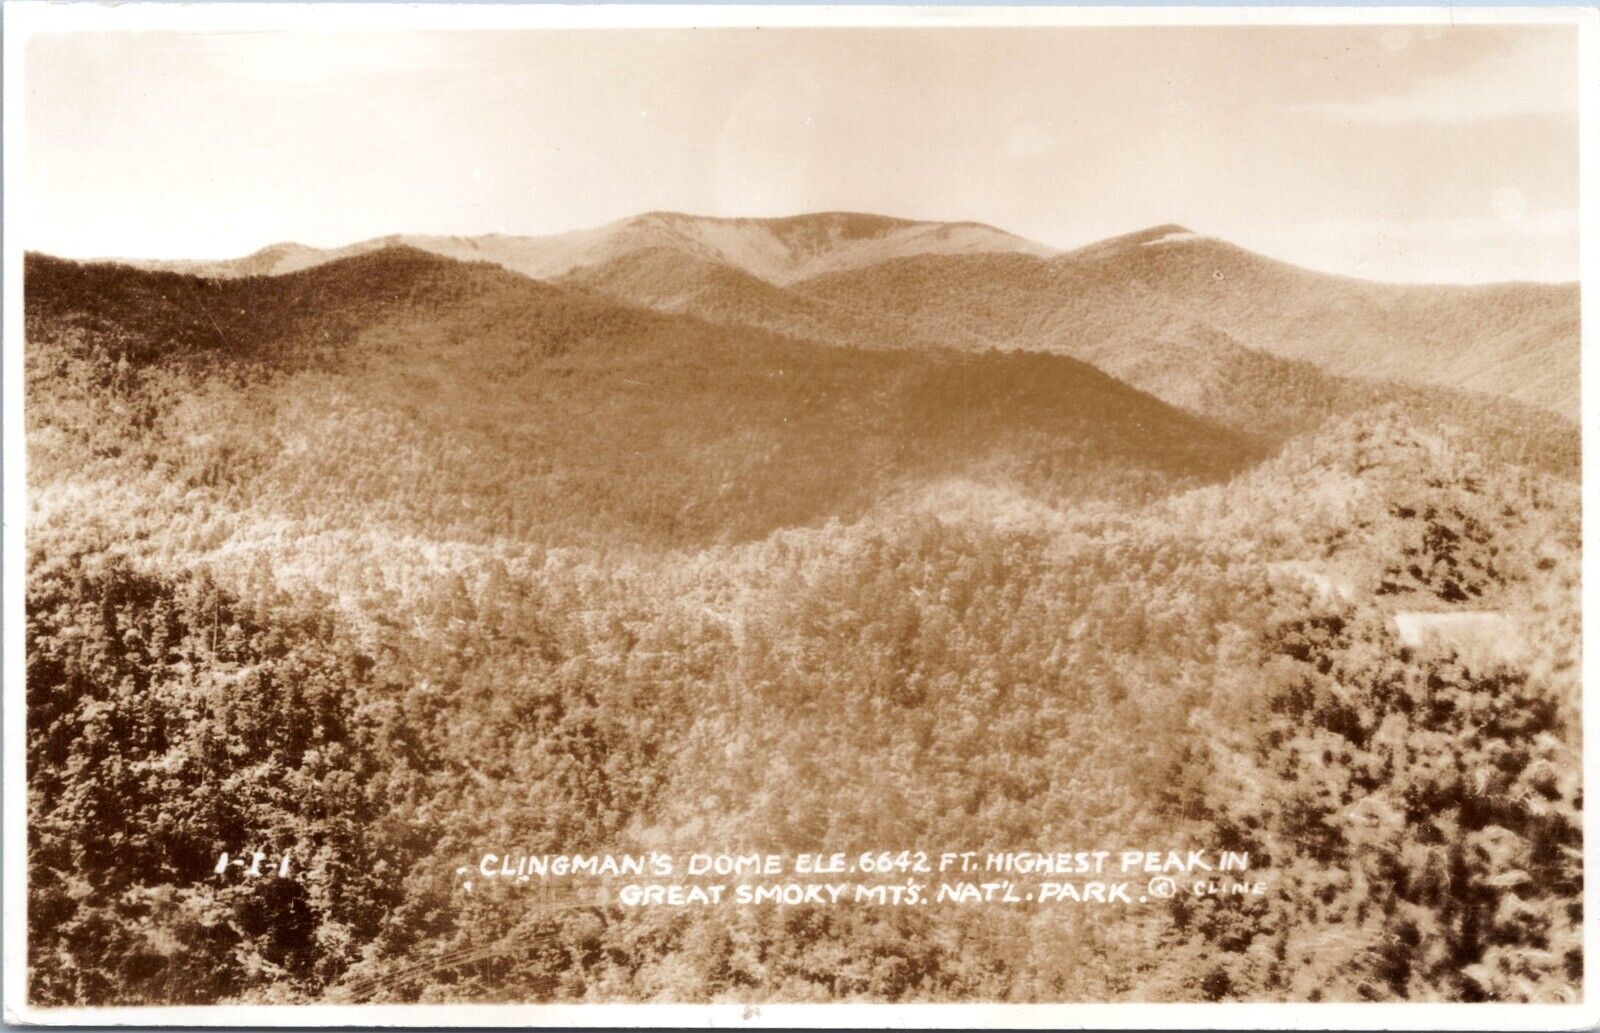 RPPC - Clingman's Dome, Great Smoky Mountains NP- Tennessee - Cline Photo c1930s